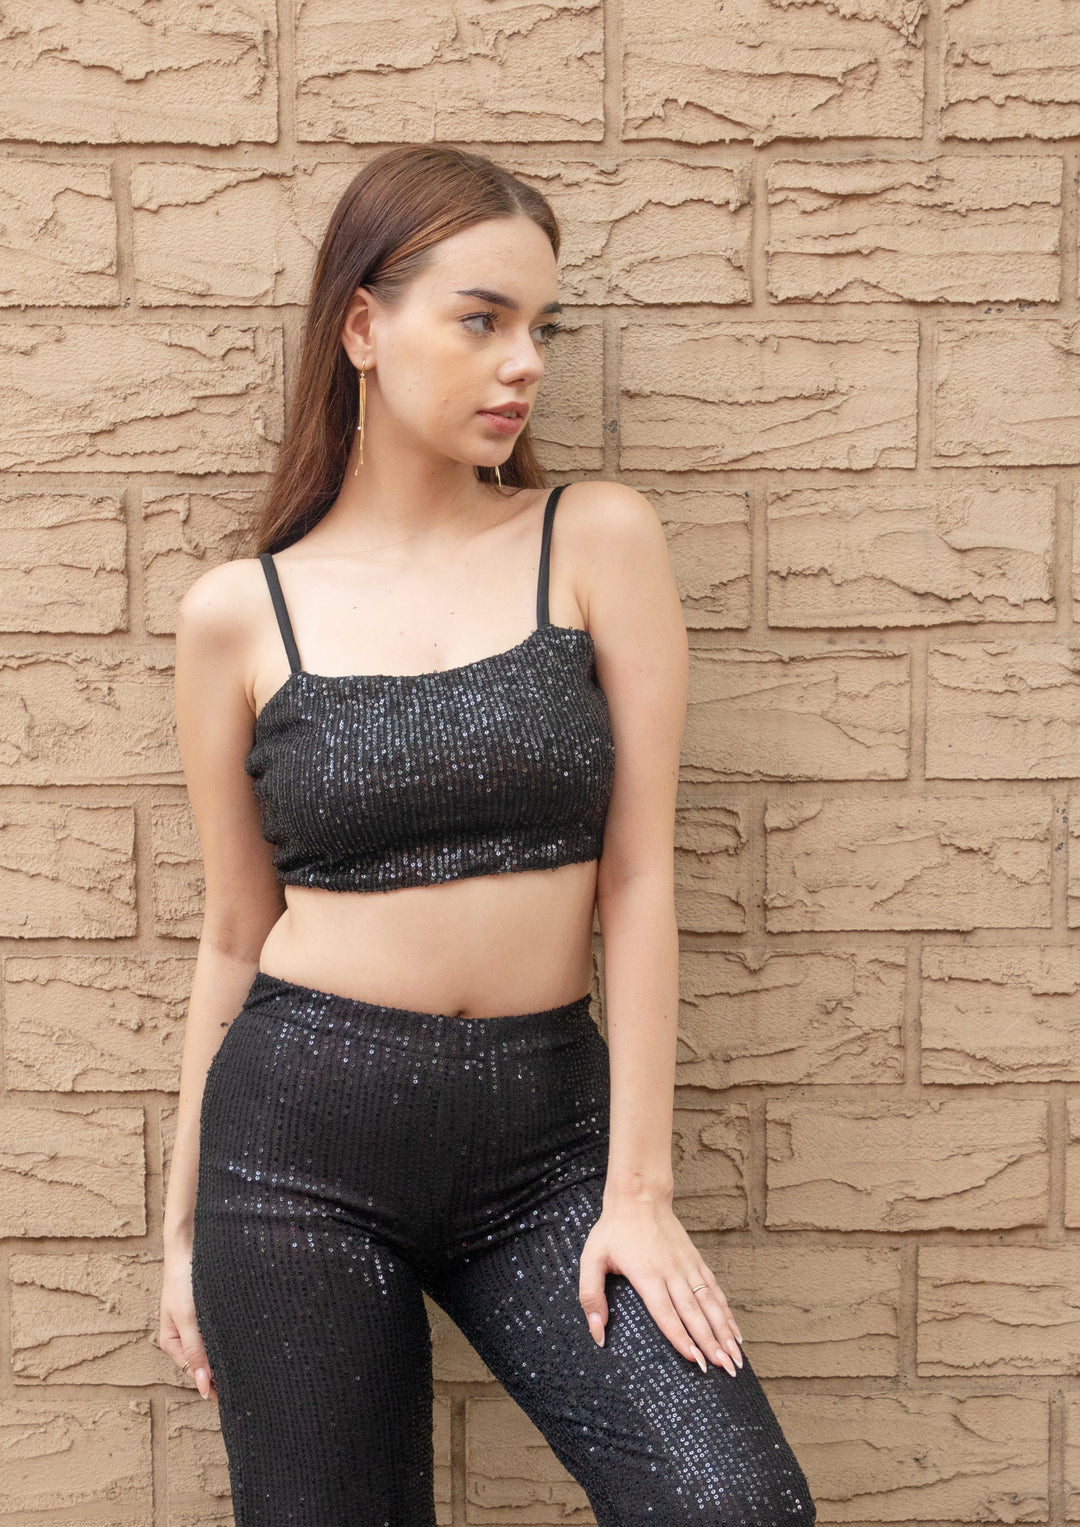 Black Bling Cropped Top